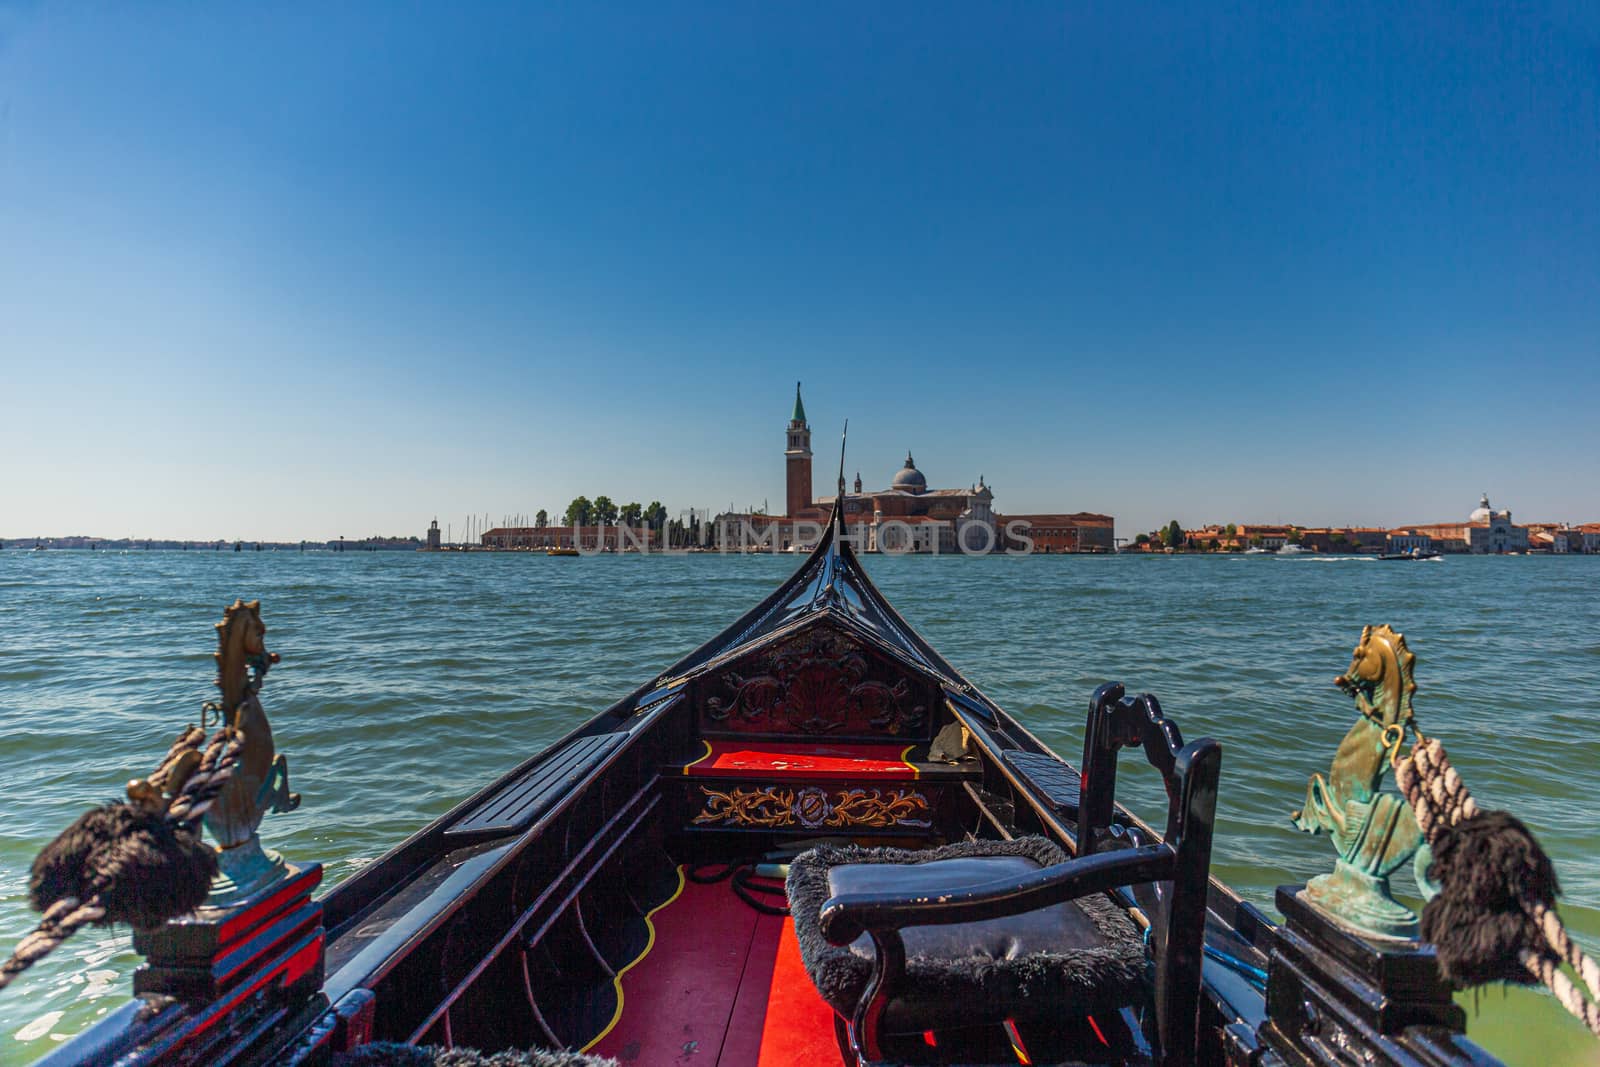 Point of view in an gondola boat with San Giorgio Maggiore in the background by COffe